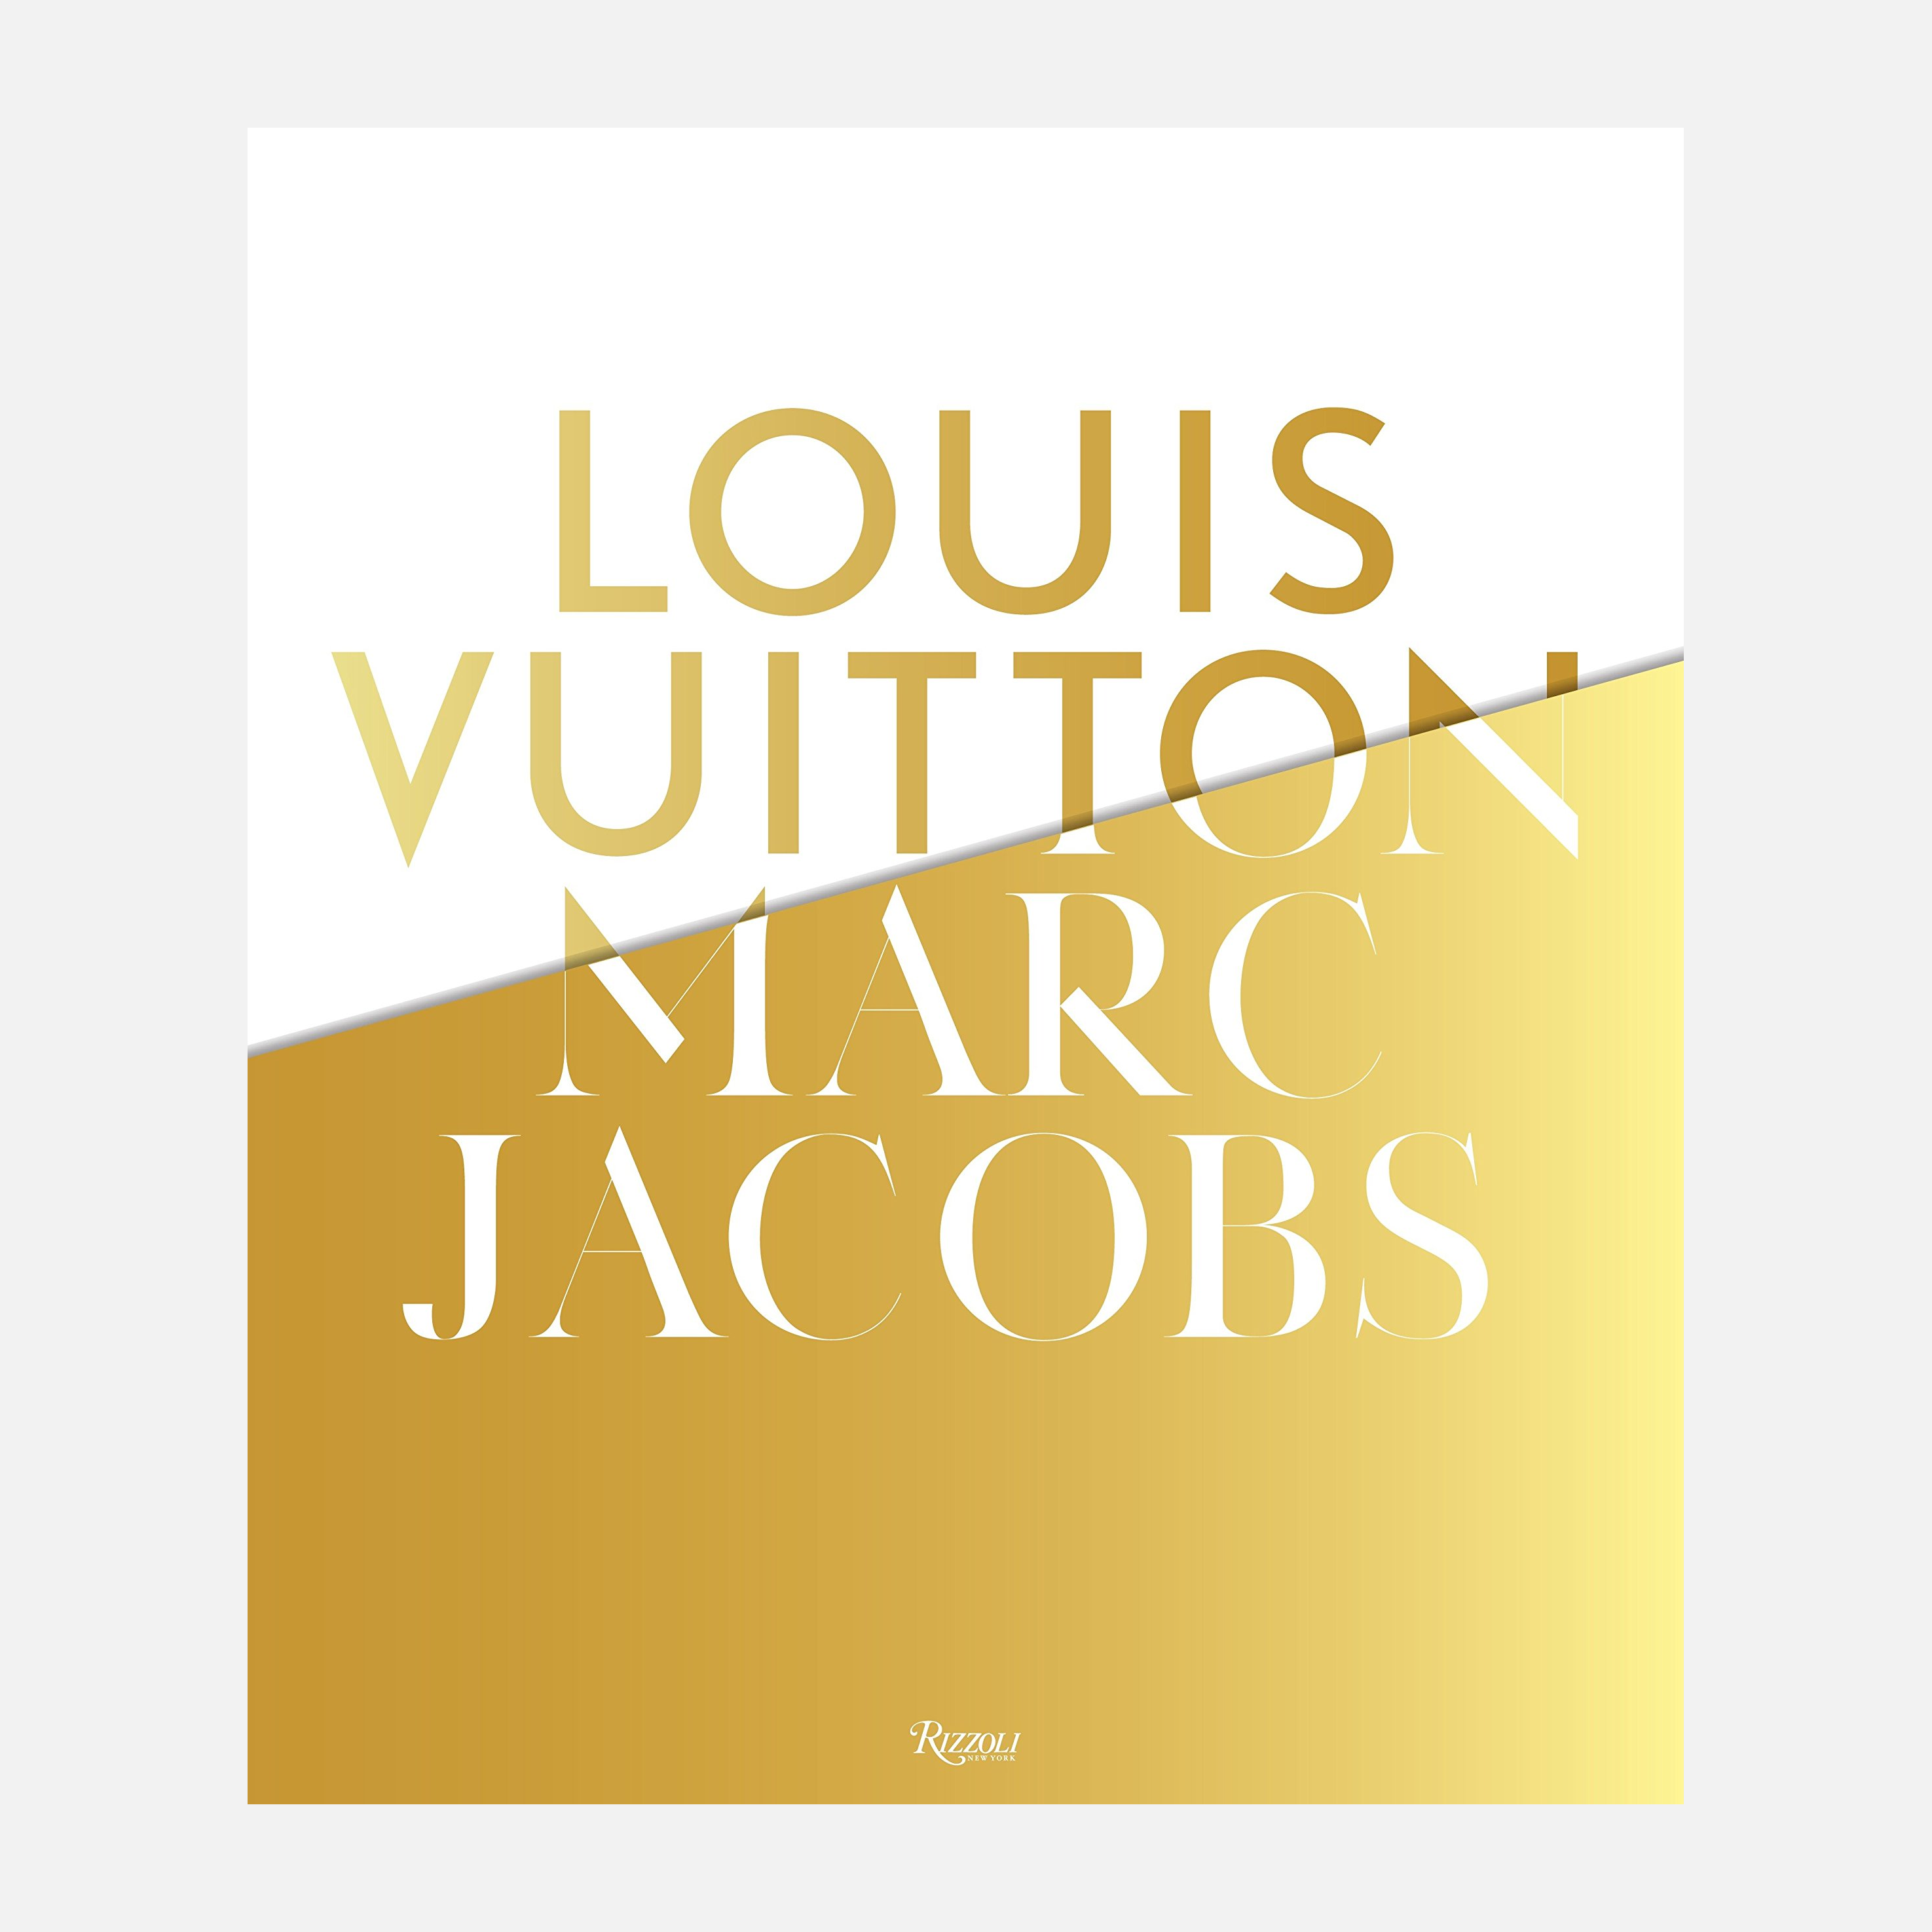 Louis Vuitton Marc Jacobs This book is just as great on the inside as it  looks on the outside